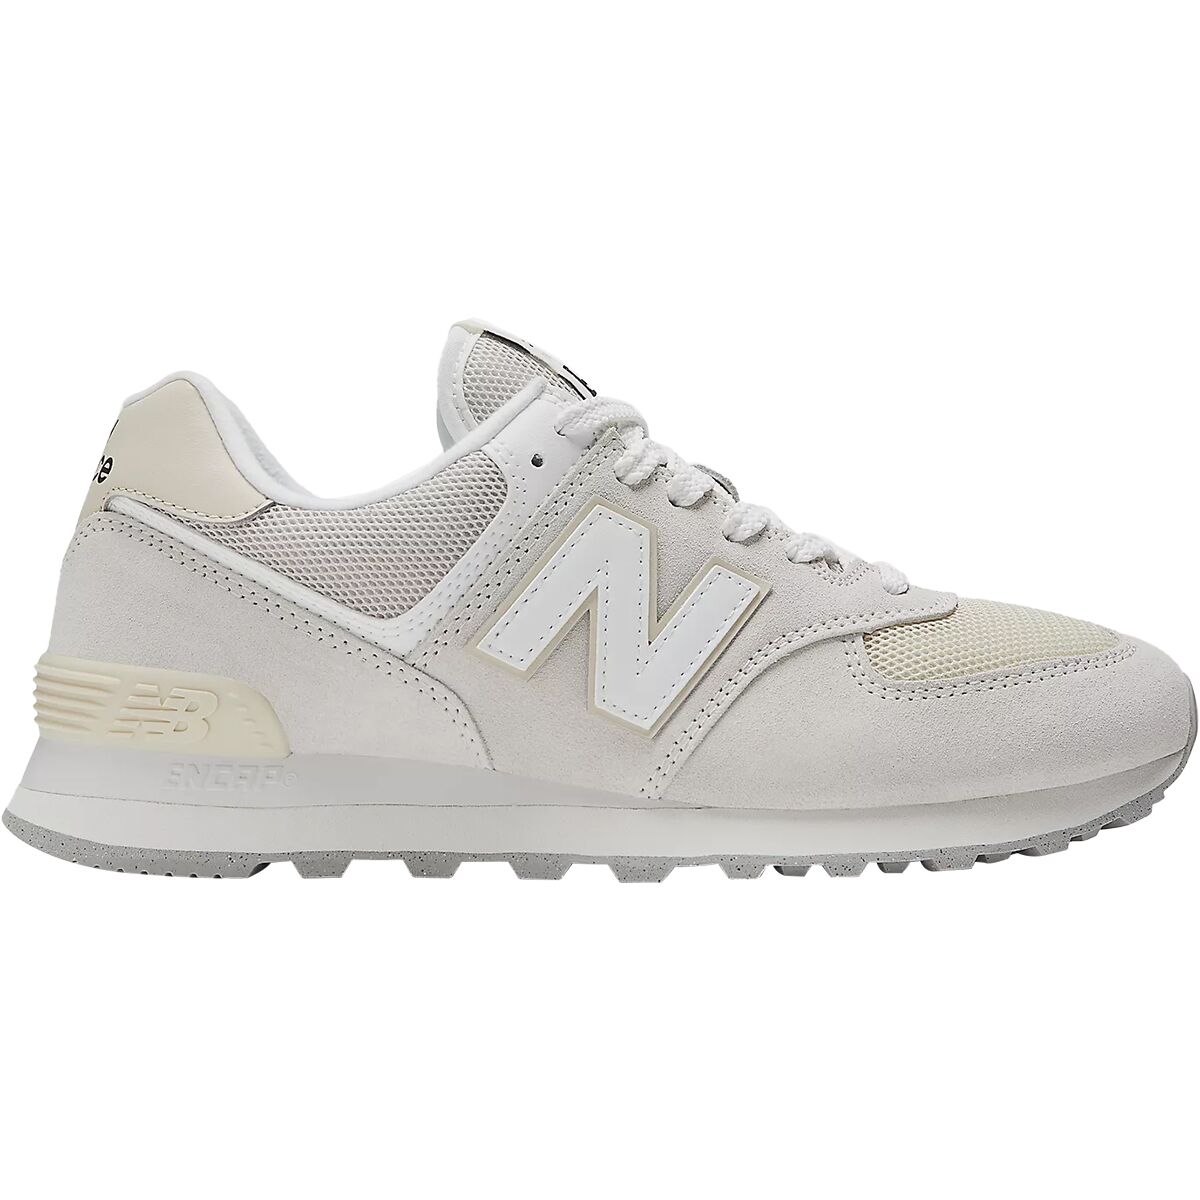 New Balance 574 Leather/Suede Shoe